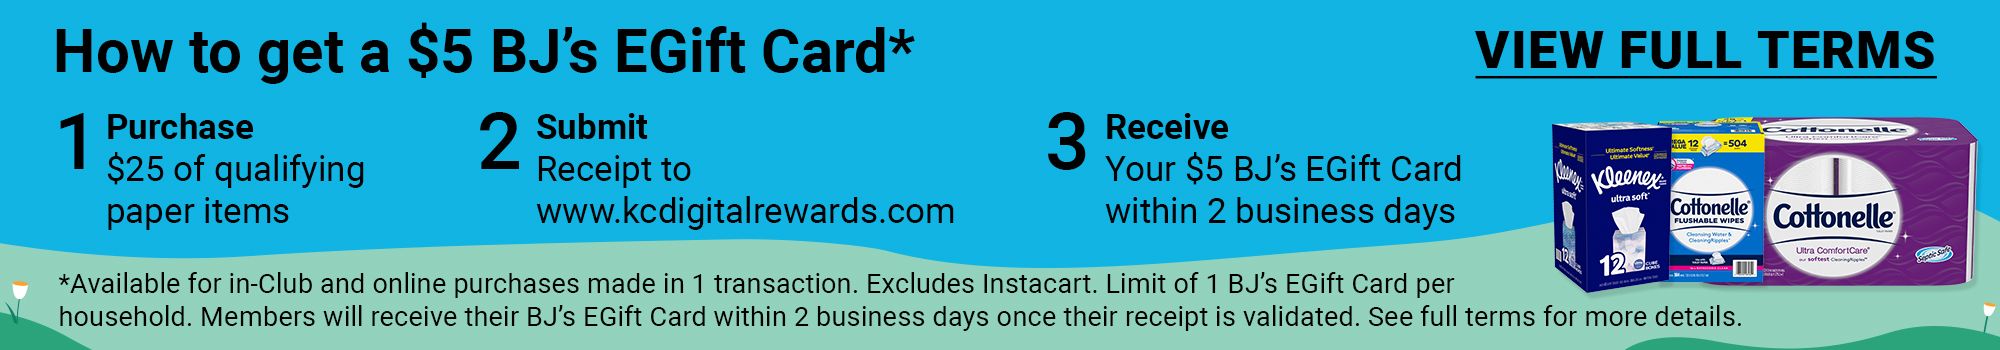 How to get a $5 BJ's EGift Card*. 1. Purchase $25 of qualifying paper items. 2. Submit receipt to www.kcdigitalrewards.com. 3. Receive $5 BJ's EGift Card within two business days. *Available online only. Excludes Instacart. Limit of 1 BJ's EGift Card per household. Members will receive their BJ's EGift Card within 2 business days once their receipt is validated. See full terms for more details. Click here to view full terms.